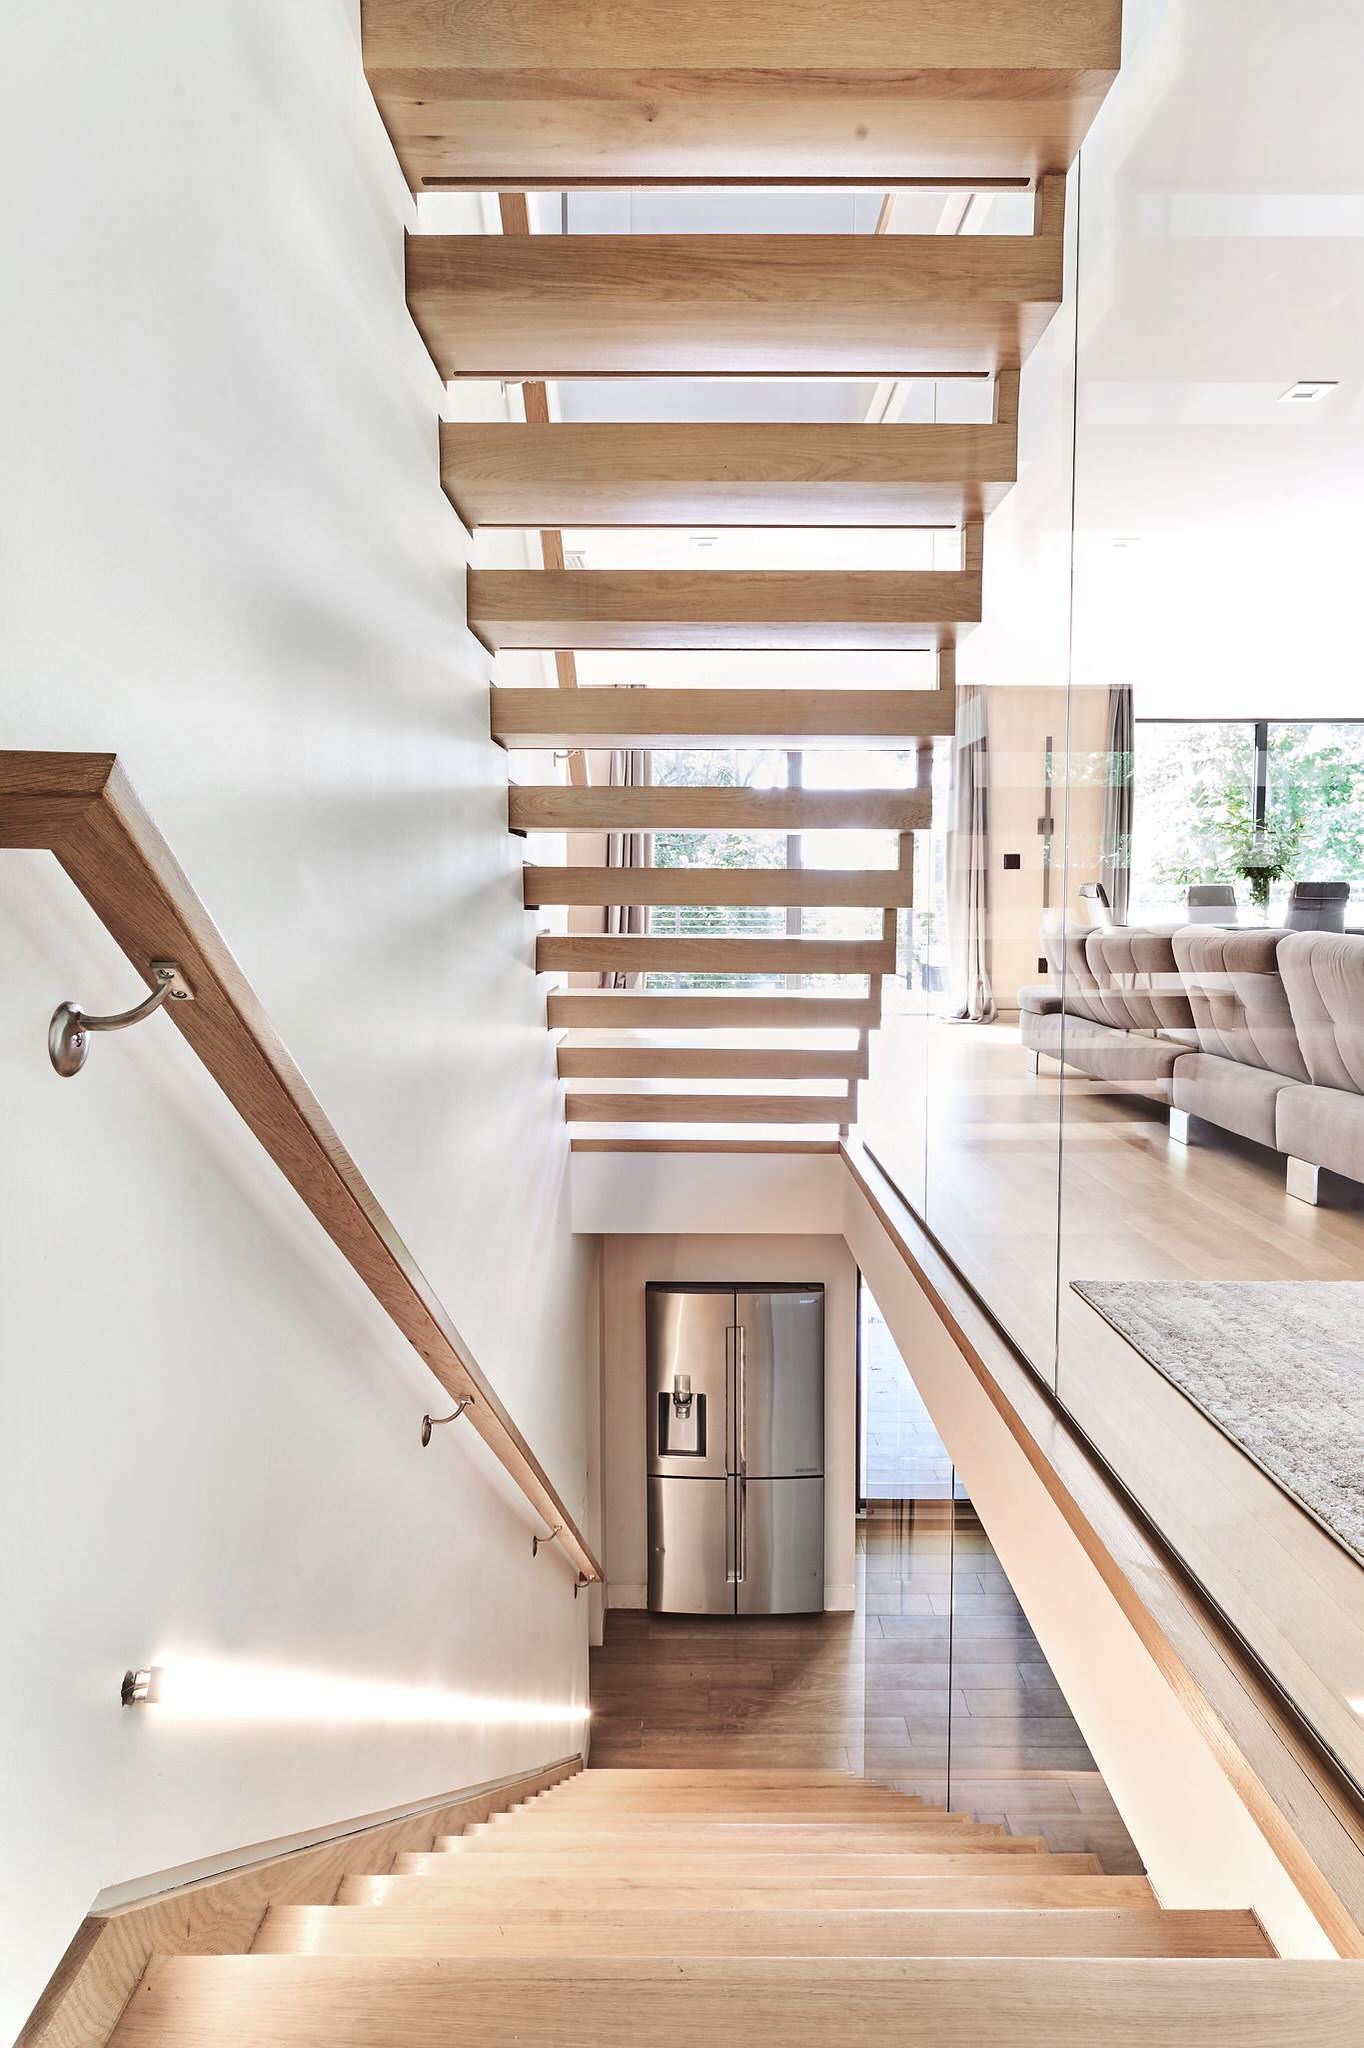 Contemporay stairs